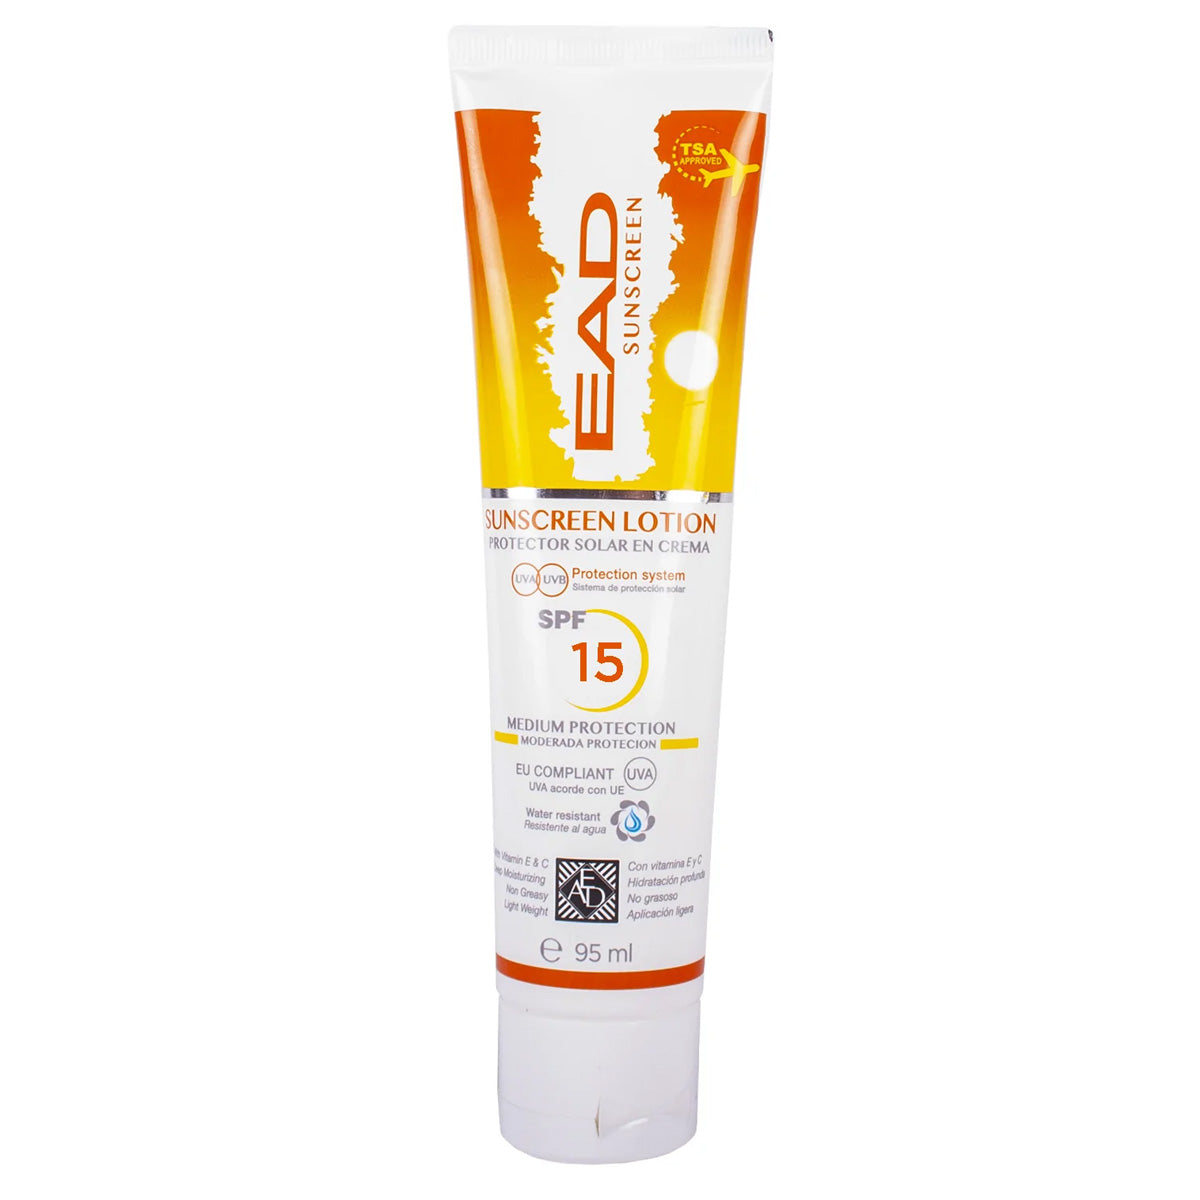 EAD - Sunscreen Lotion SPF 15 - 95ml - Continental Food Store